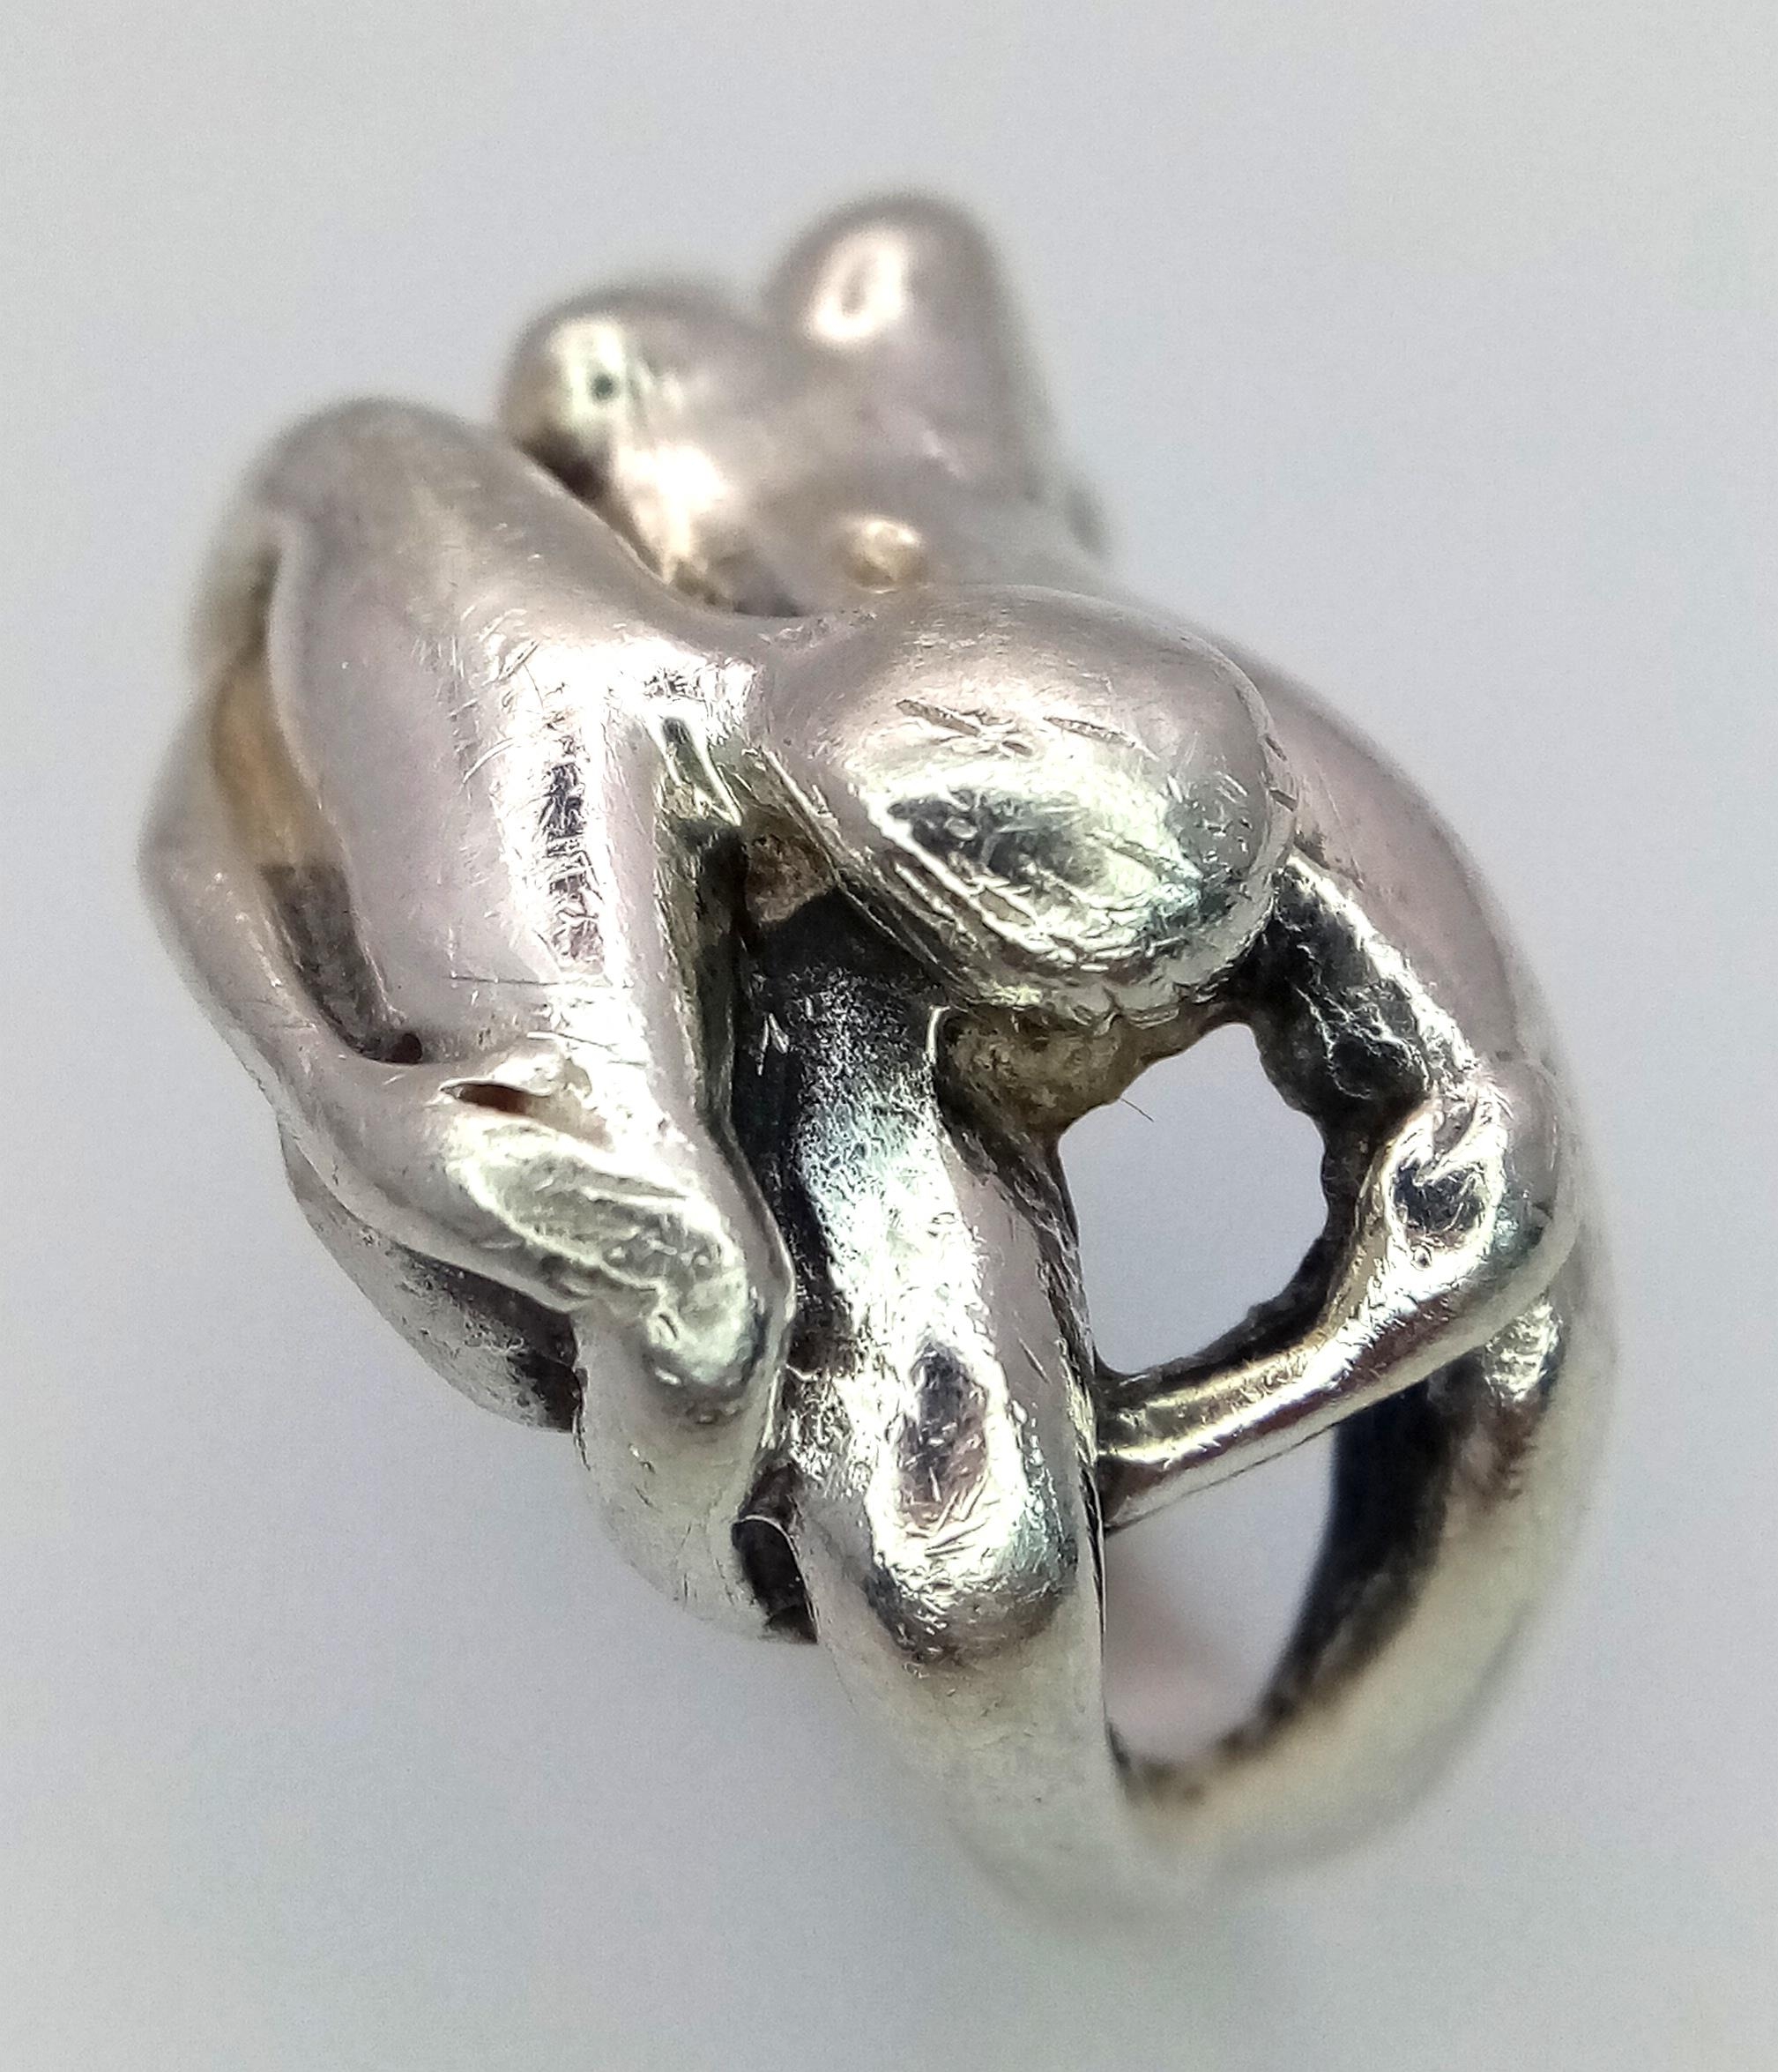 A Vintage and Rare Sterling Silver Erotic Design Ring Size N-N1/2. Measures 1.4cm Wide at the